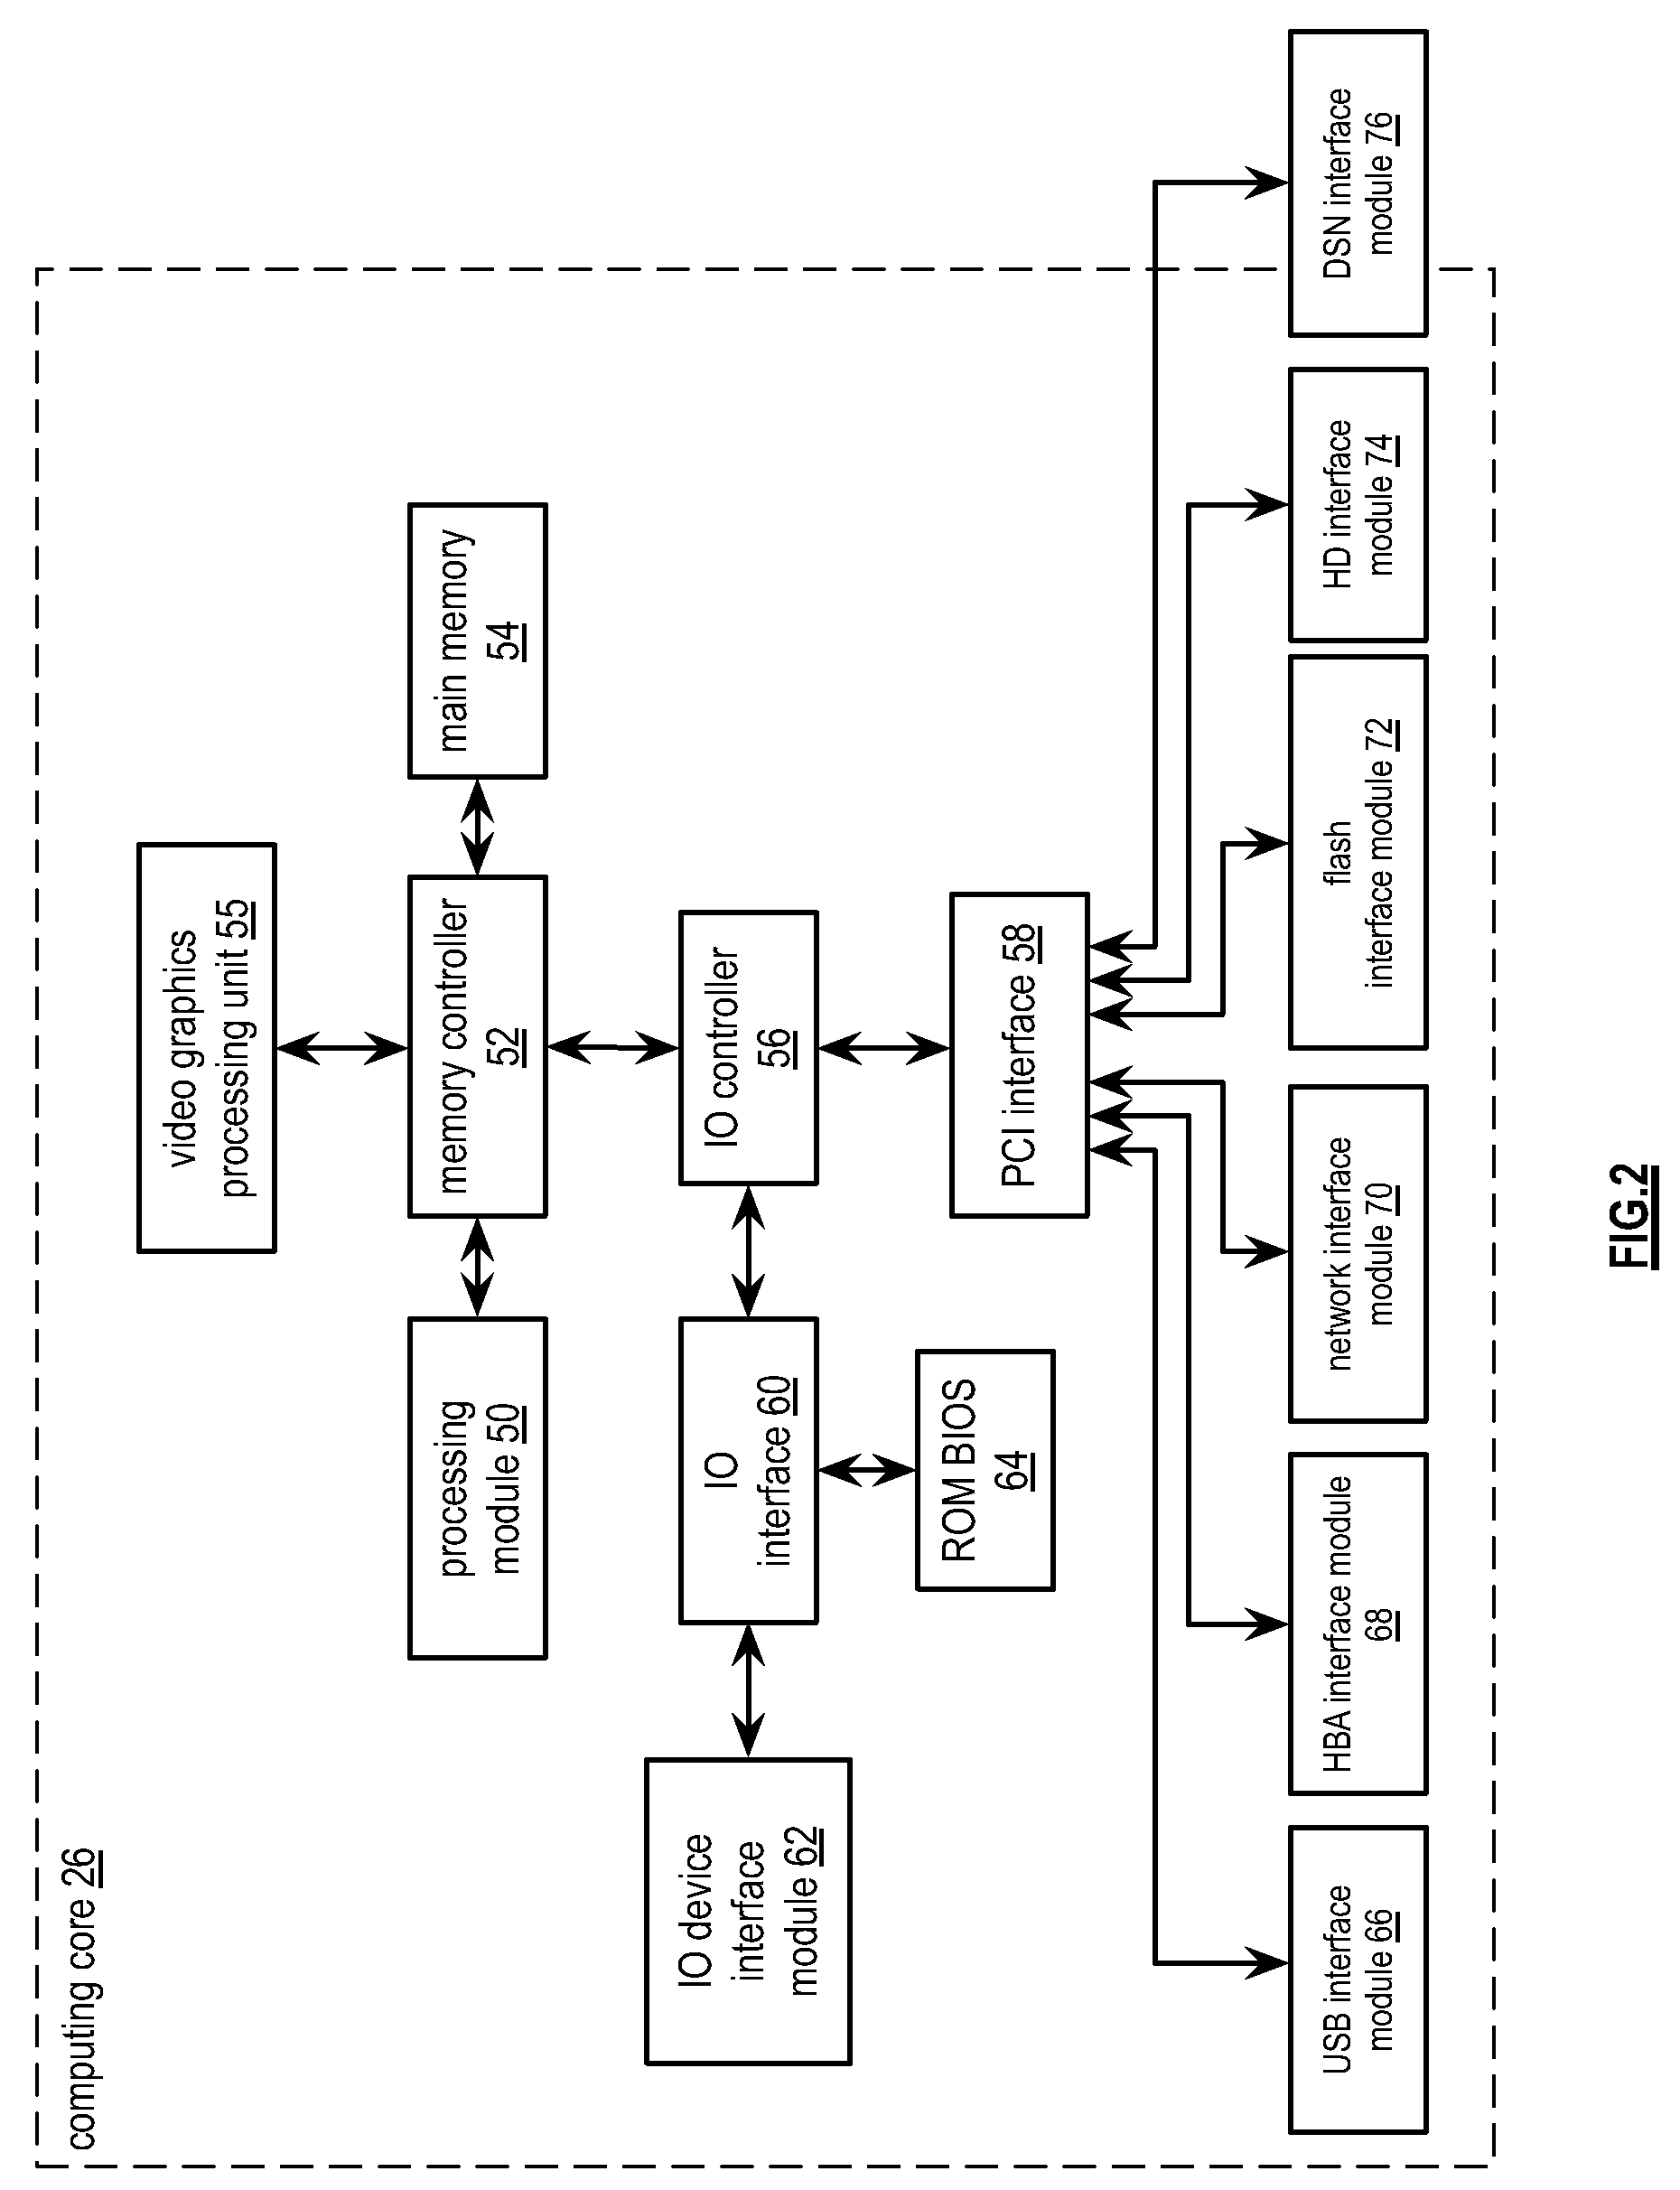 Data revision synchronization in a dispersed storage network